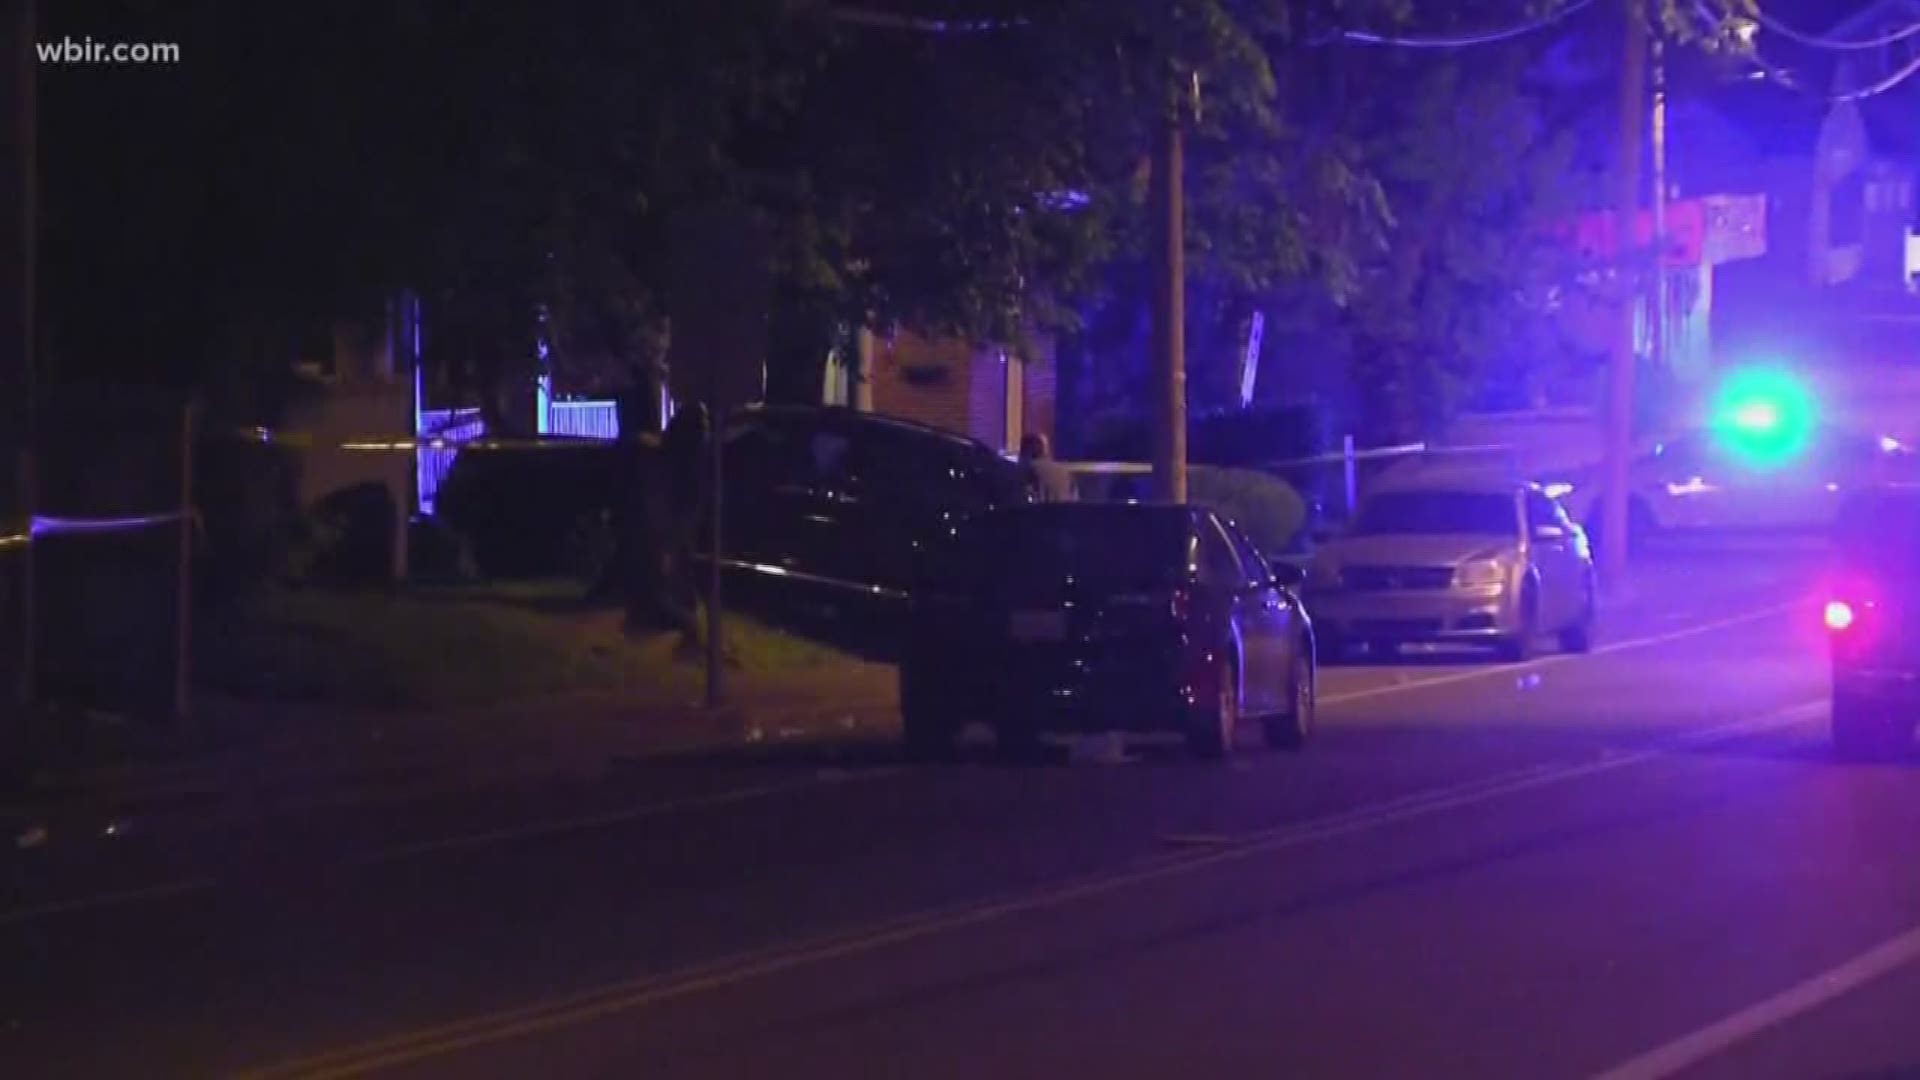 A gunman opened fire at a house party overnight in Nashville injuring at least seven people.